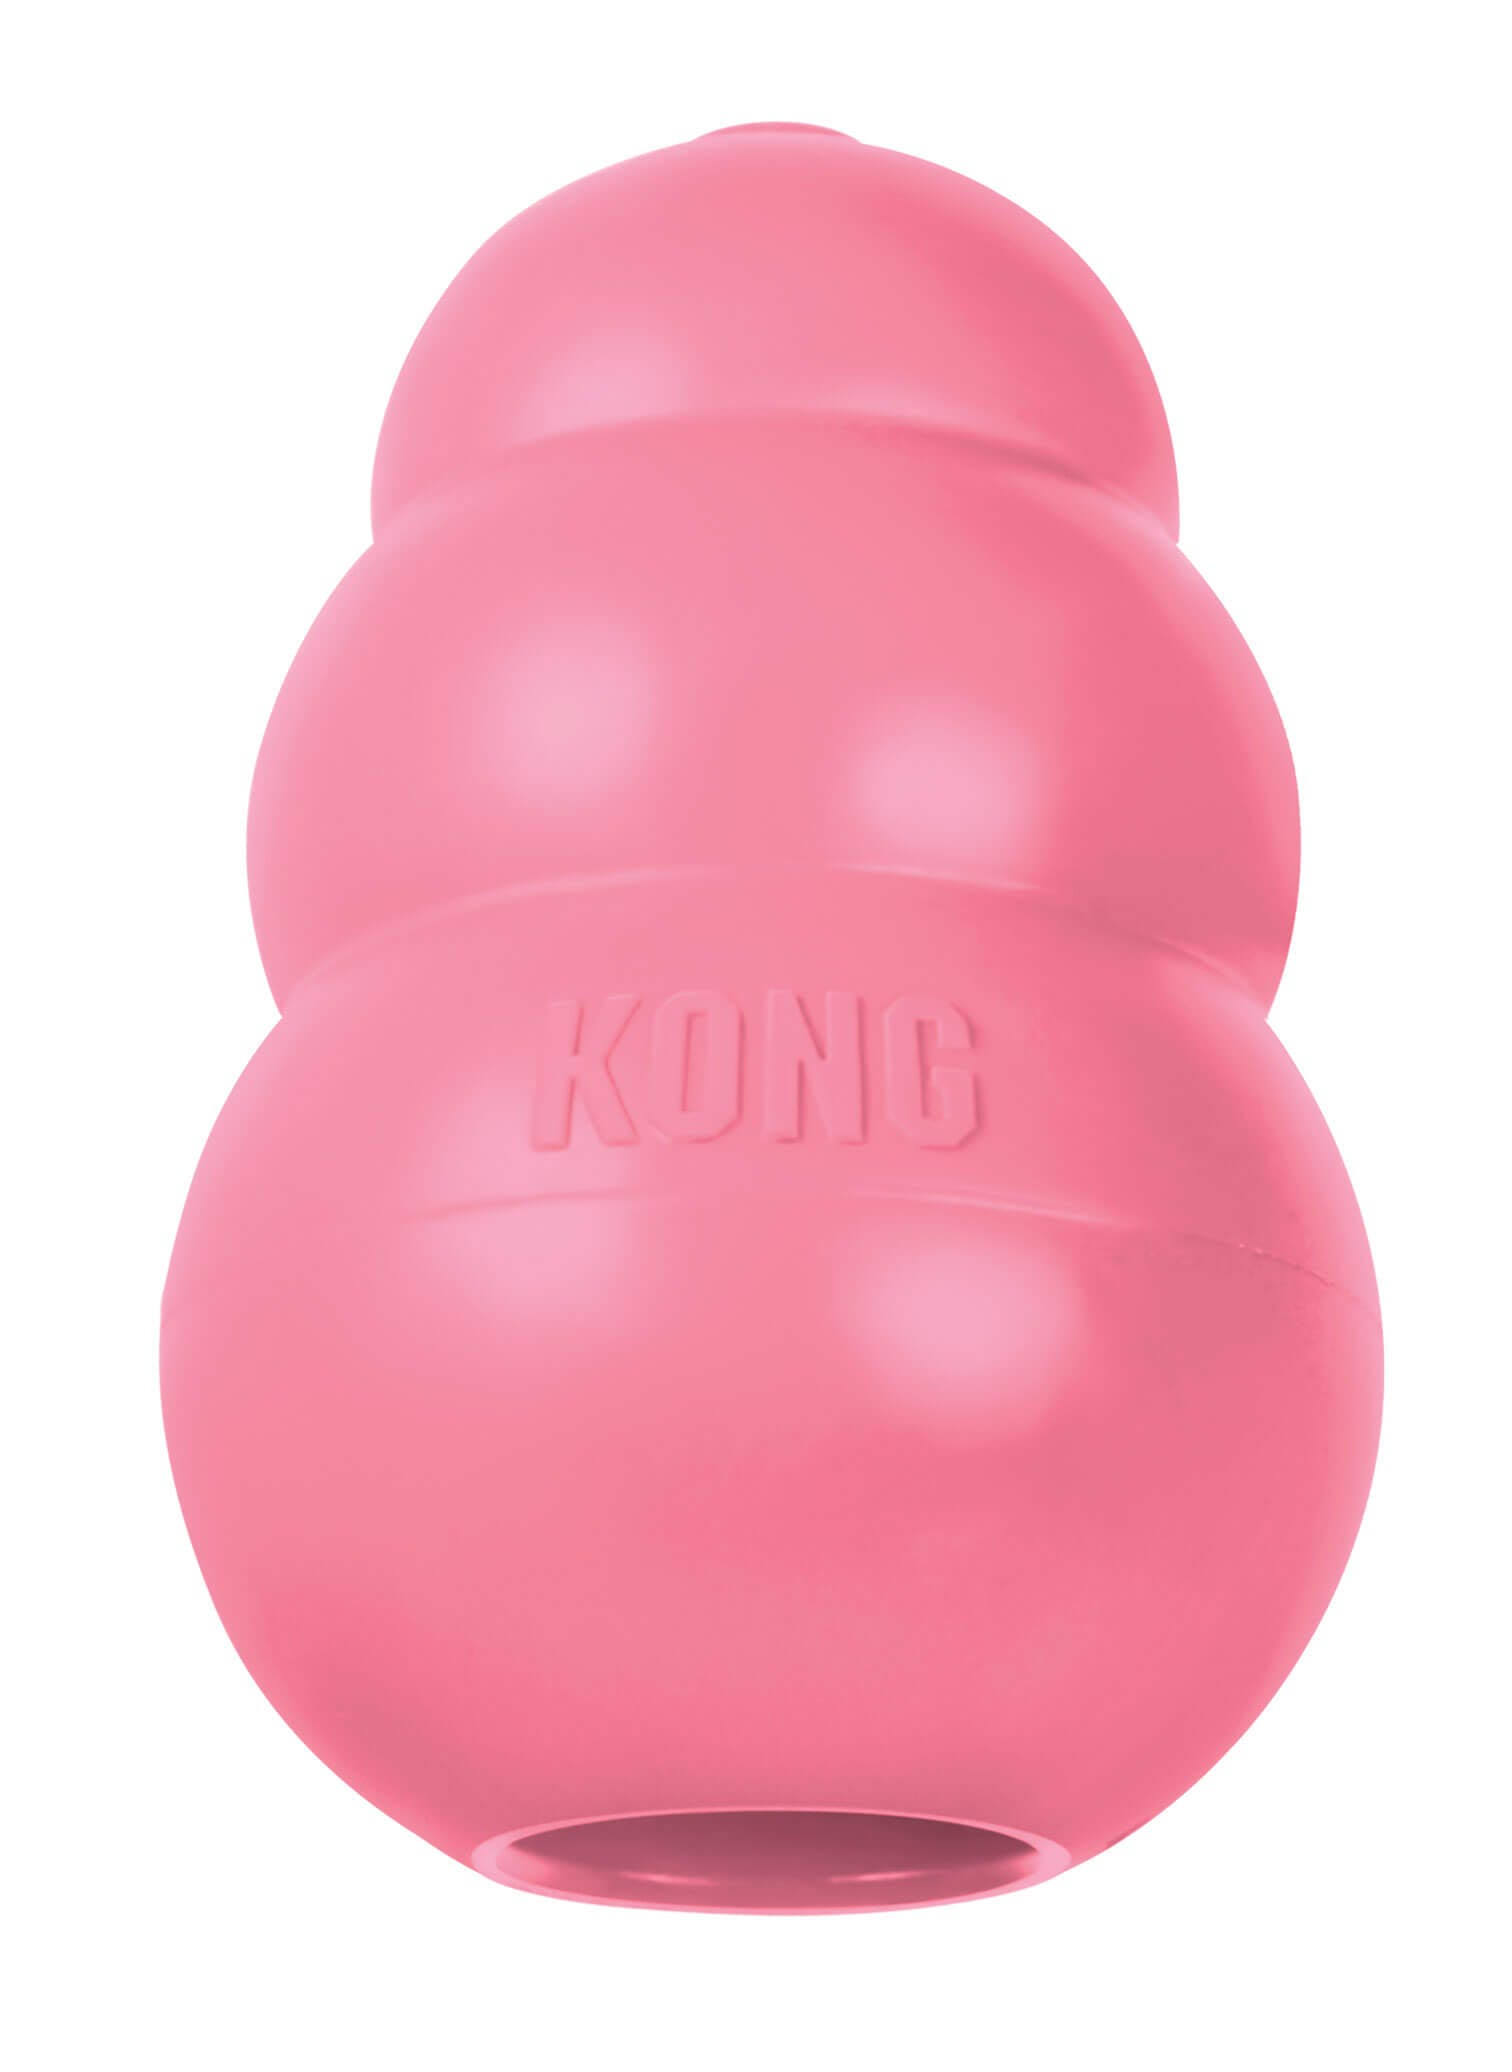 Kong Puppy Dog Toy - Small, Blue